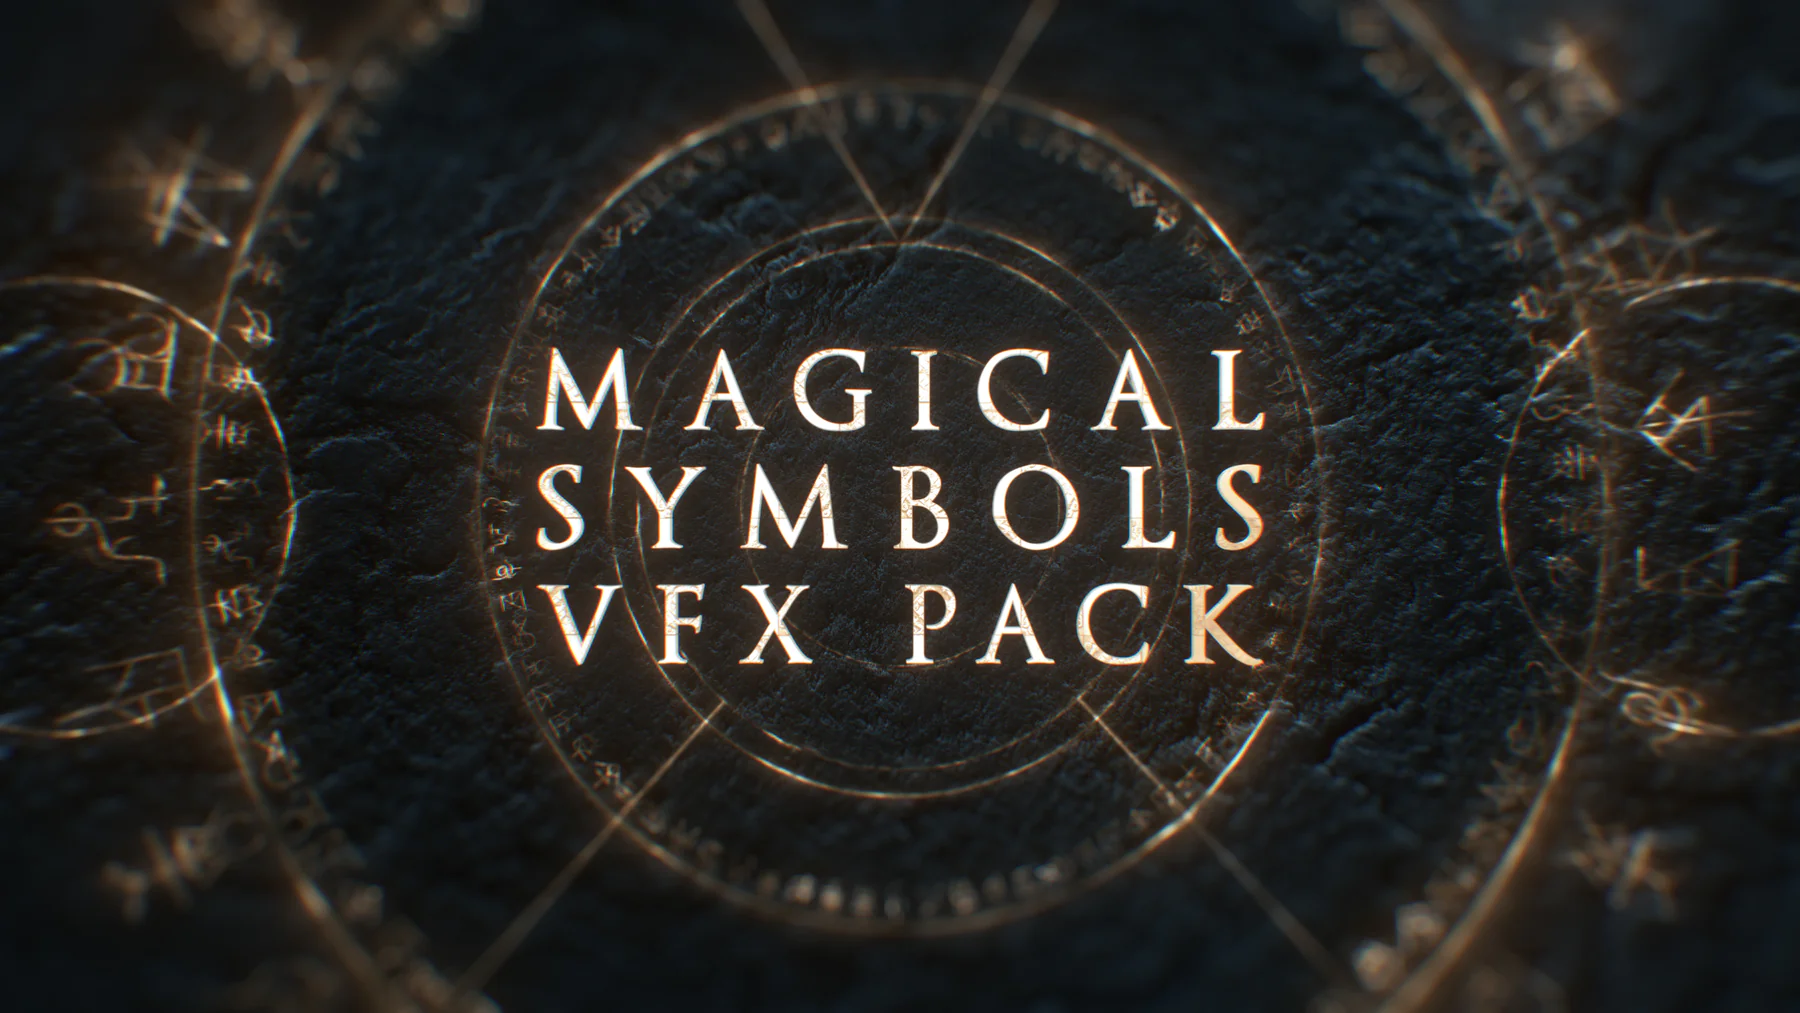 MAGICAL SYMBOLS VFX PACK – Visual Effects & Graphic Design